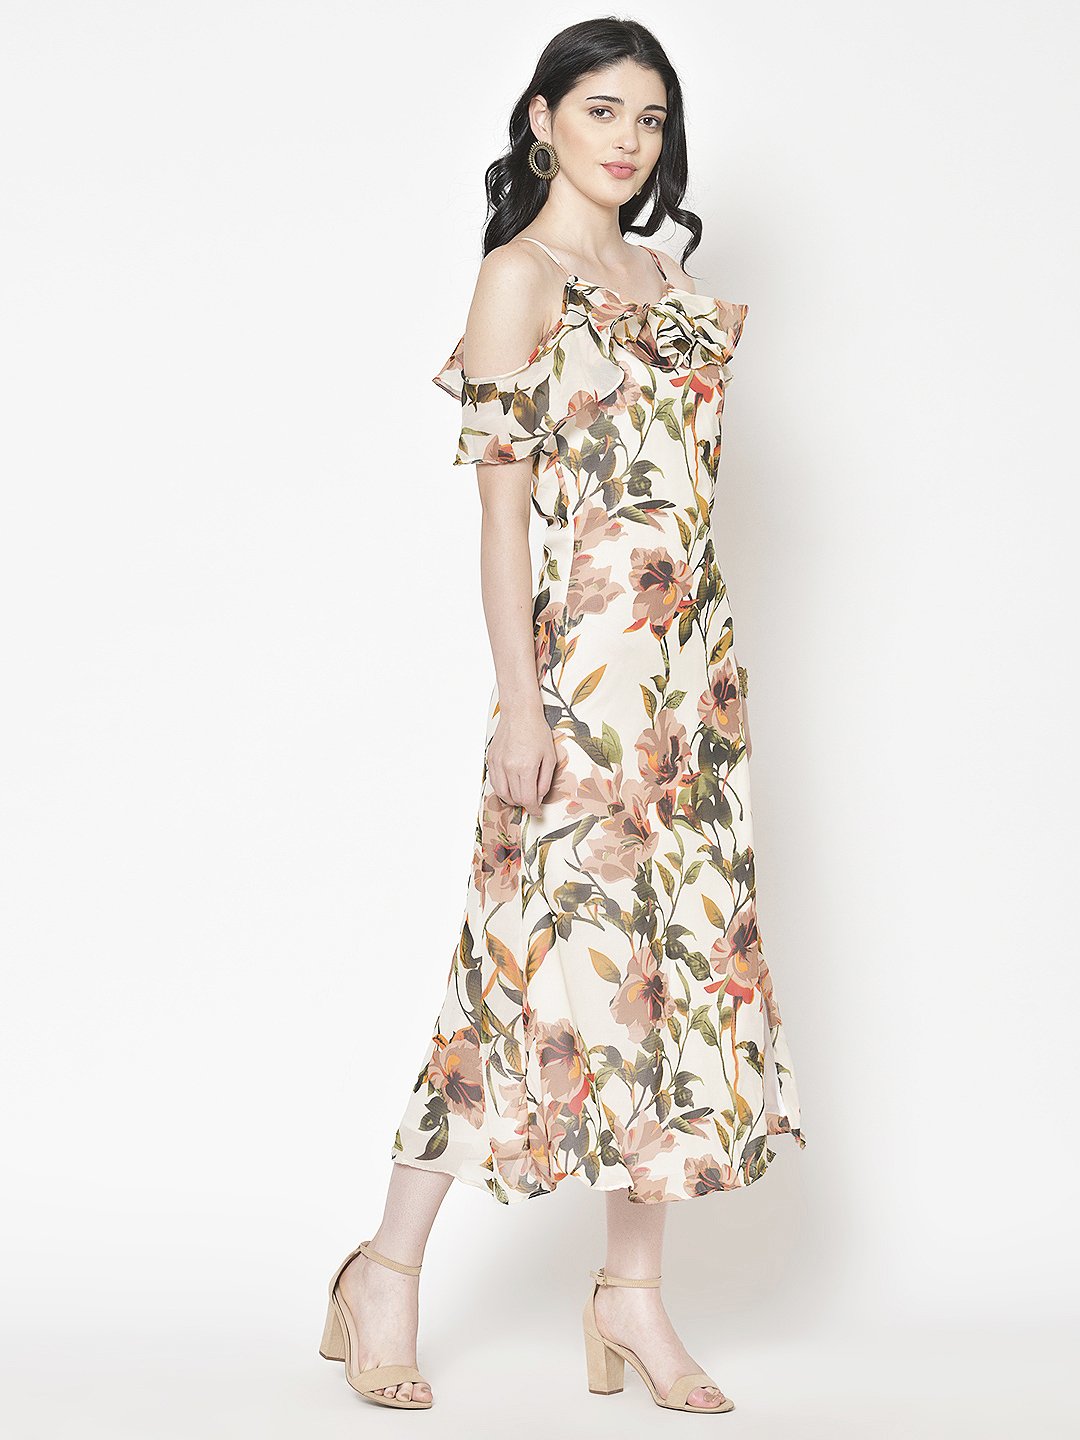 Cation Printed Dress